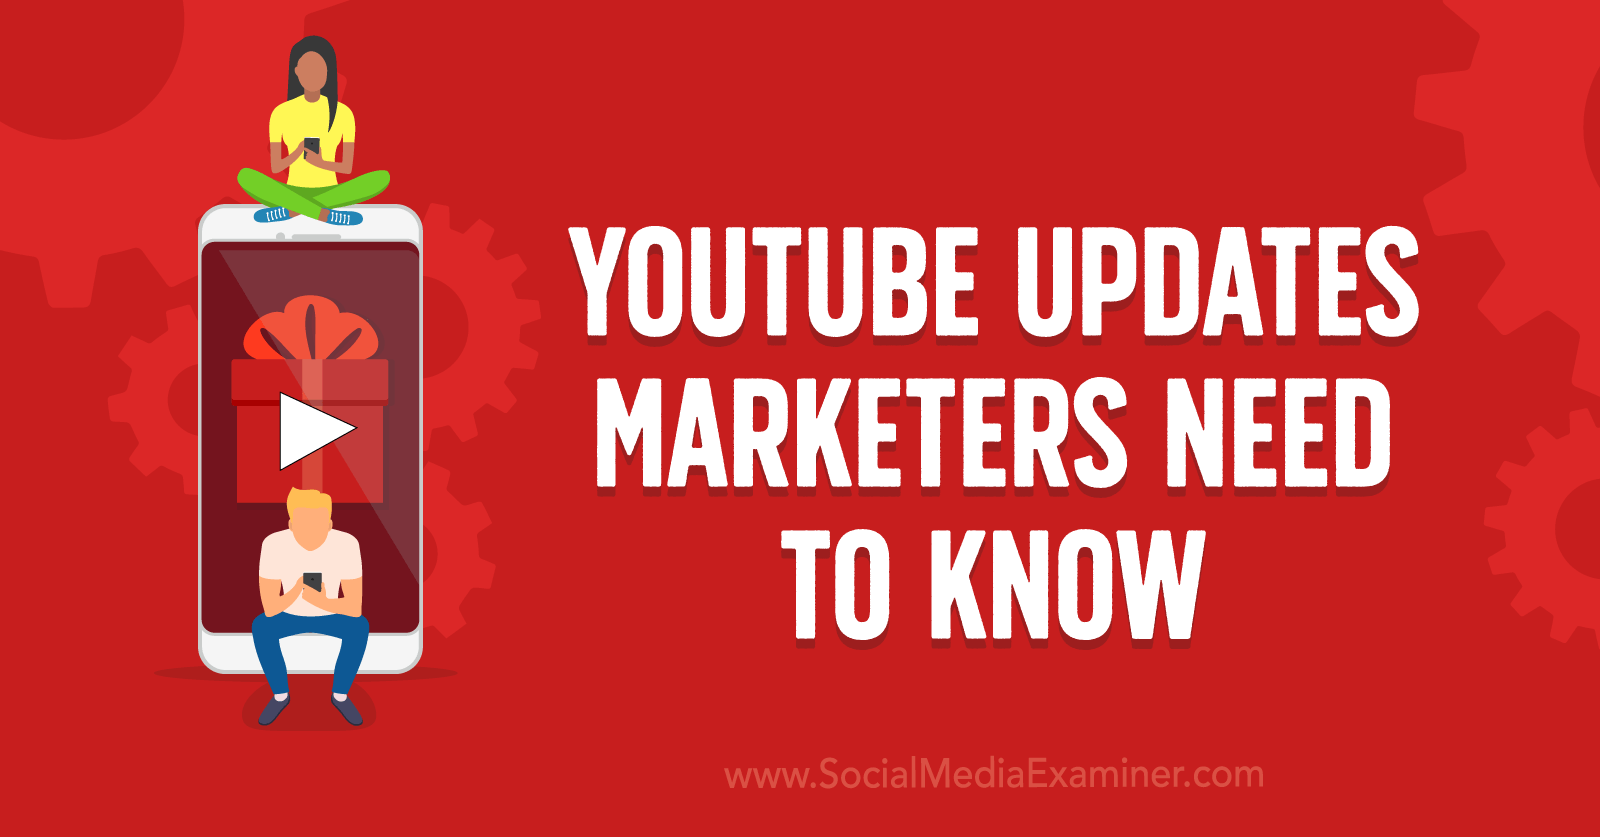 YouTube Updates Marketers Need to Know by Social Media Examiner